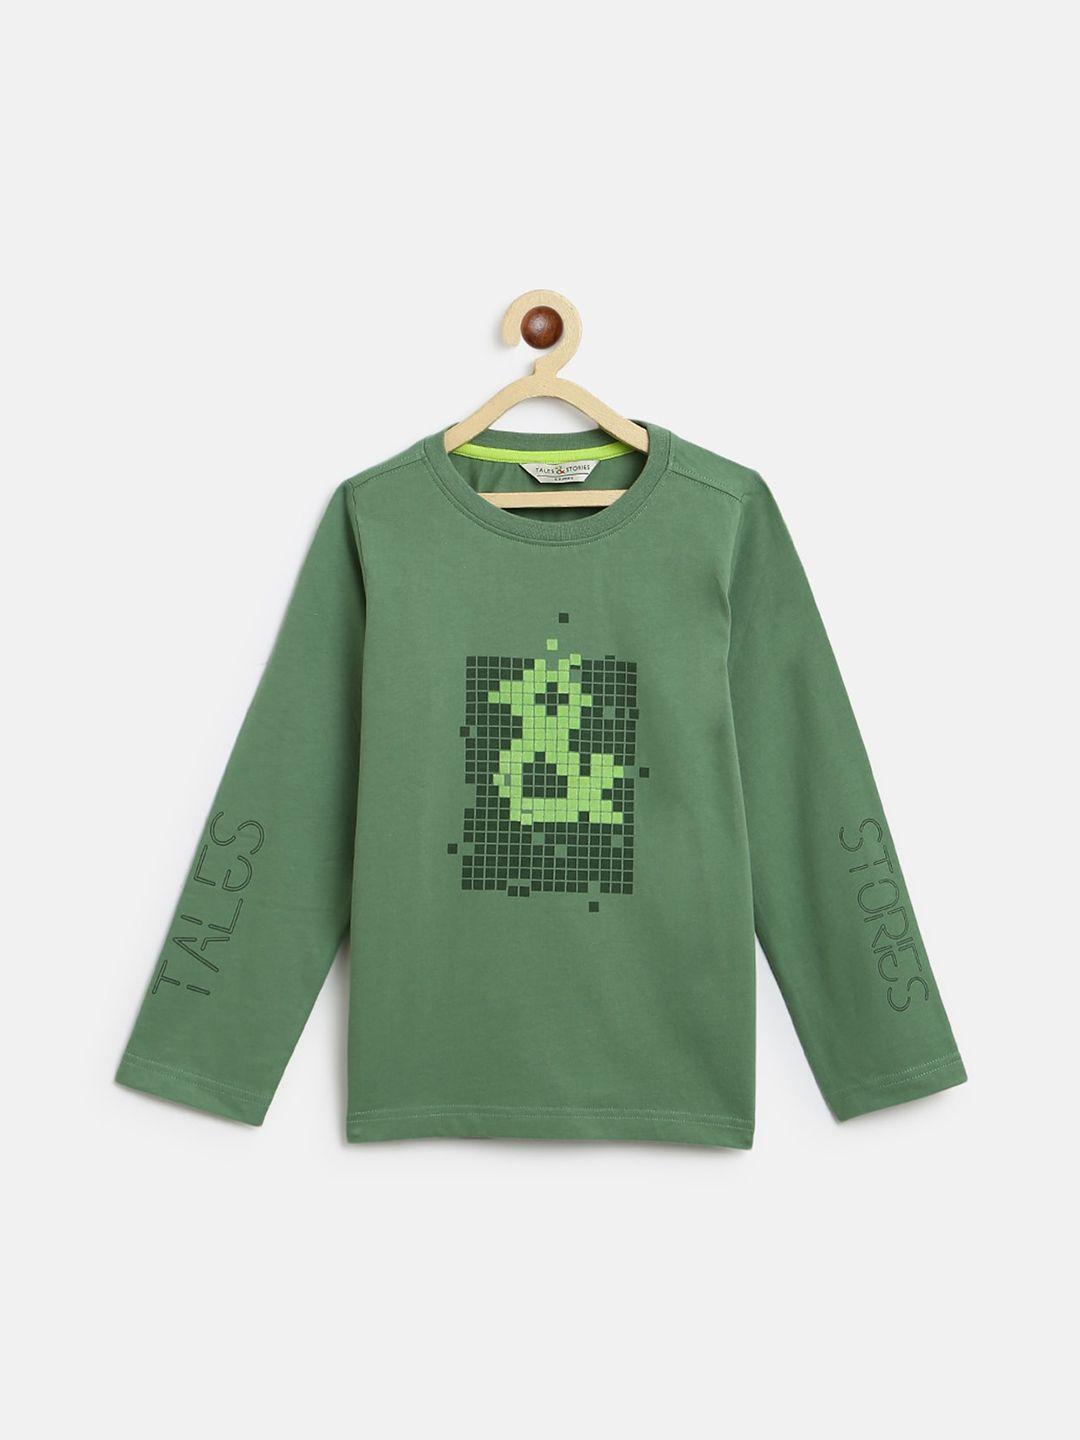 tales-&-stories-boys-long-sleeves-graphic-printed-cotton-t-shirt